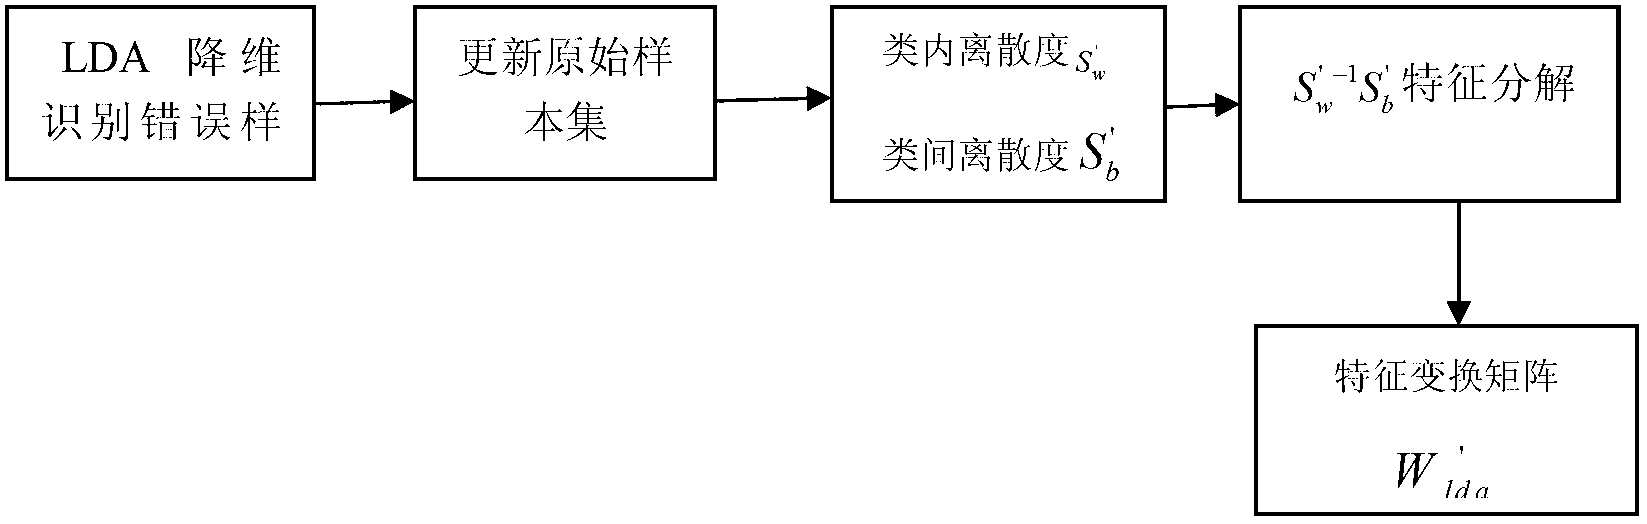 Feature dimension-reduction optimization method for Chinese character recognition